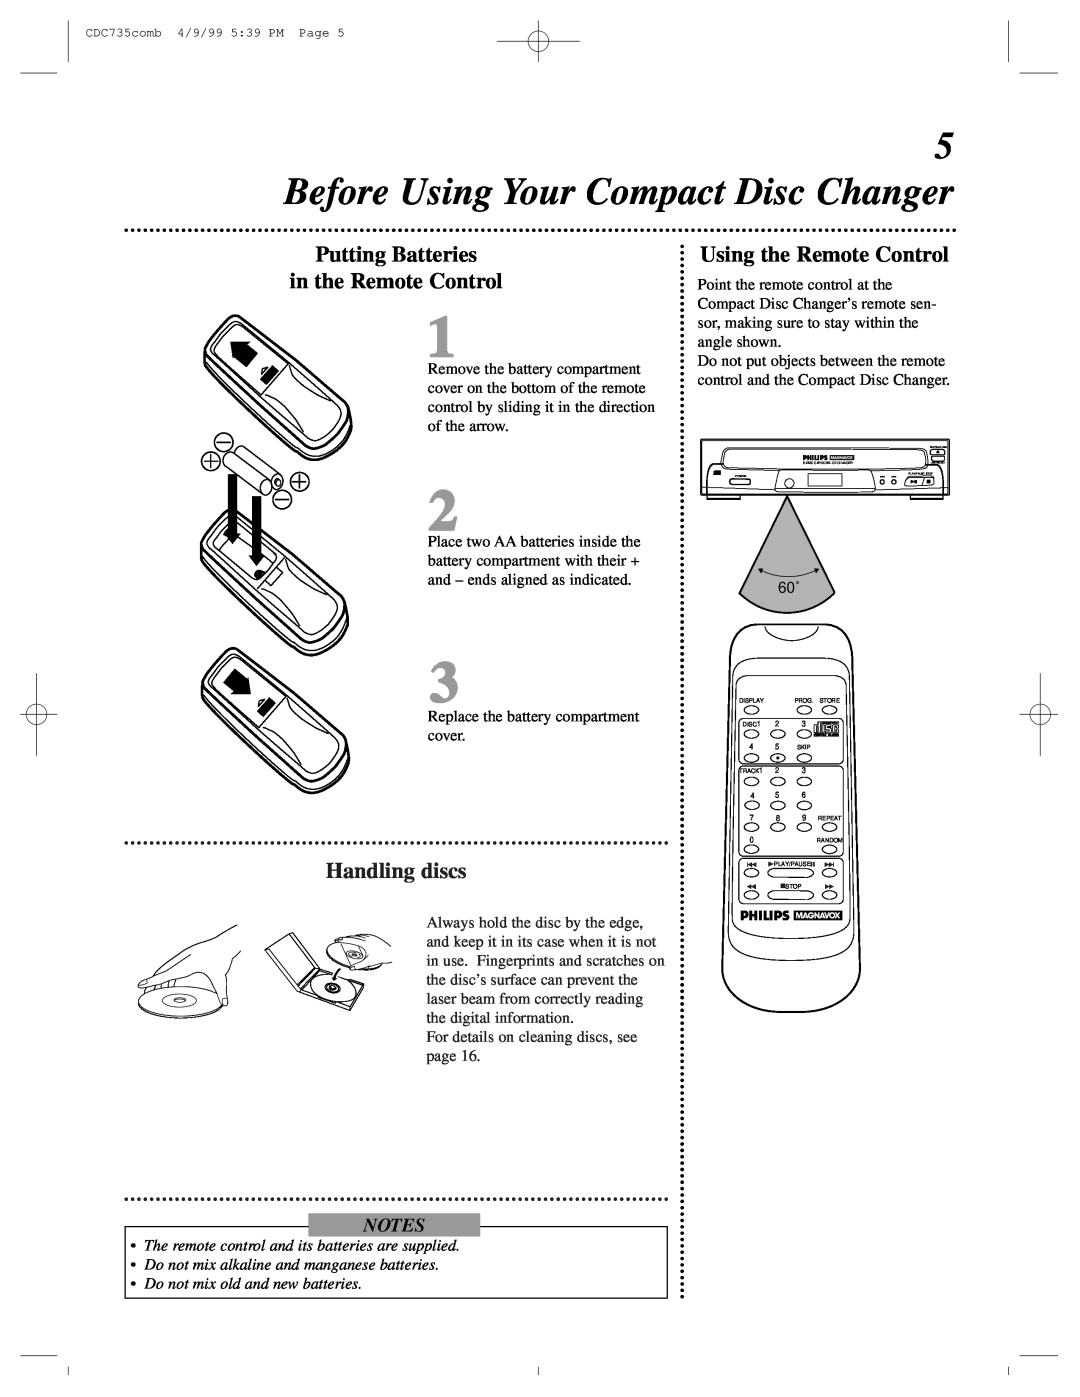 Philips CDC735 owner manual Before Using Your Compact Disc Changer, Putting Batteries in the Remote Control, Handling discs 